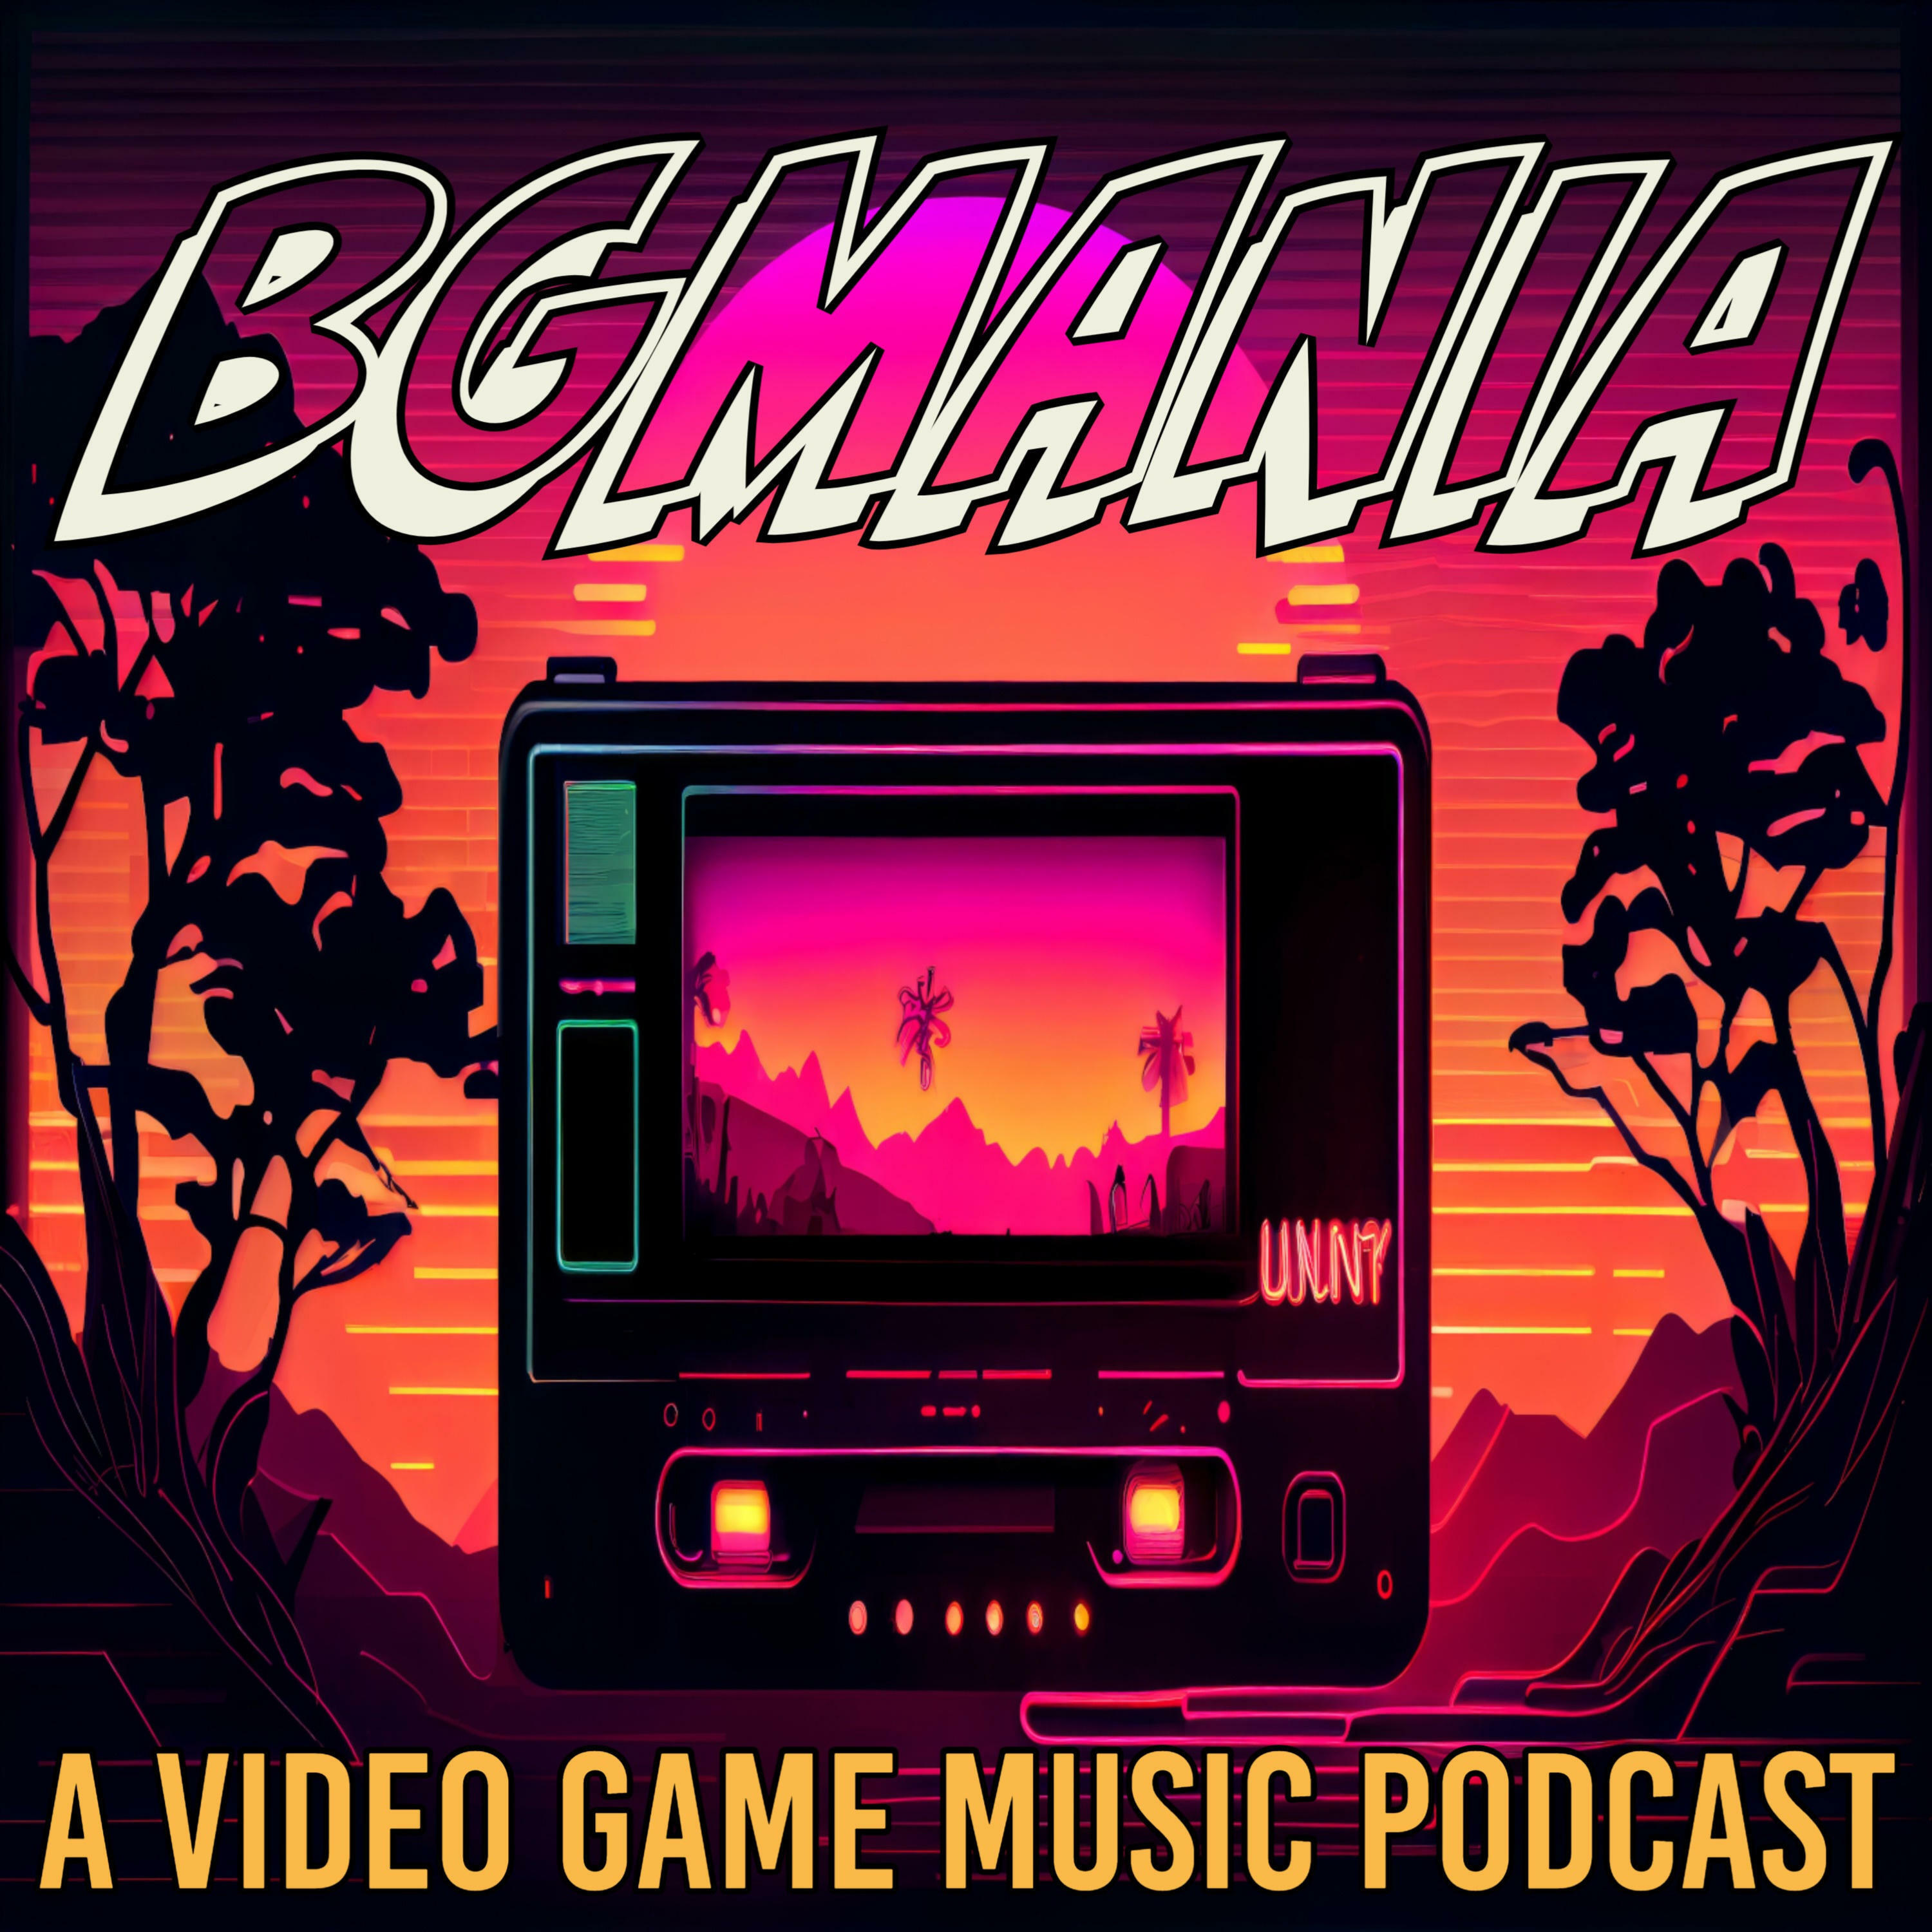 Listen To The Bgmania A Video Game Music Podcast Episode Deep Dive Jesper Kyd On Iheartradio Iheartradio